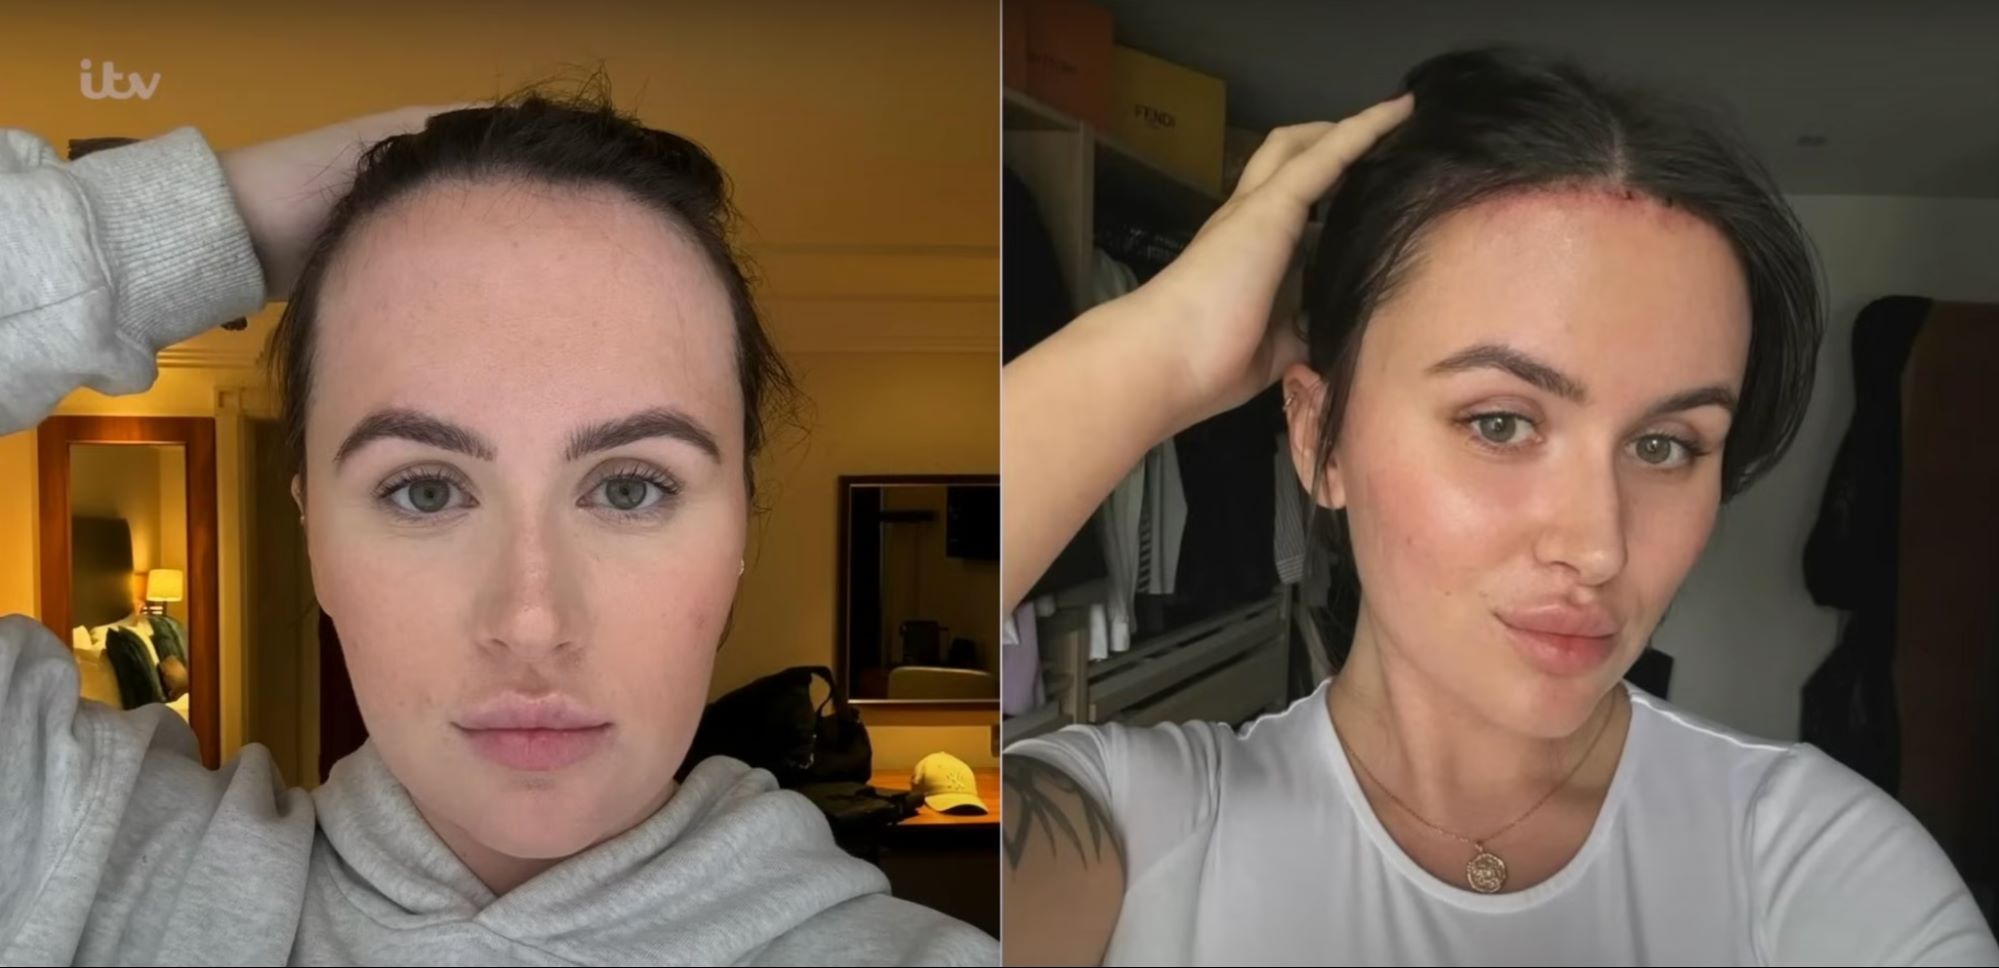 Beth Halsey’s Forehead Reduction: How It Changed Her Life